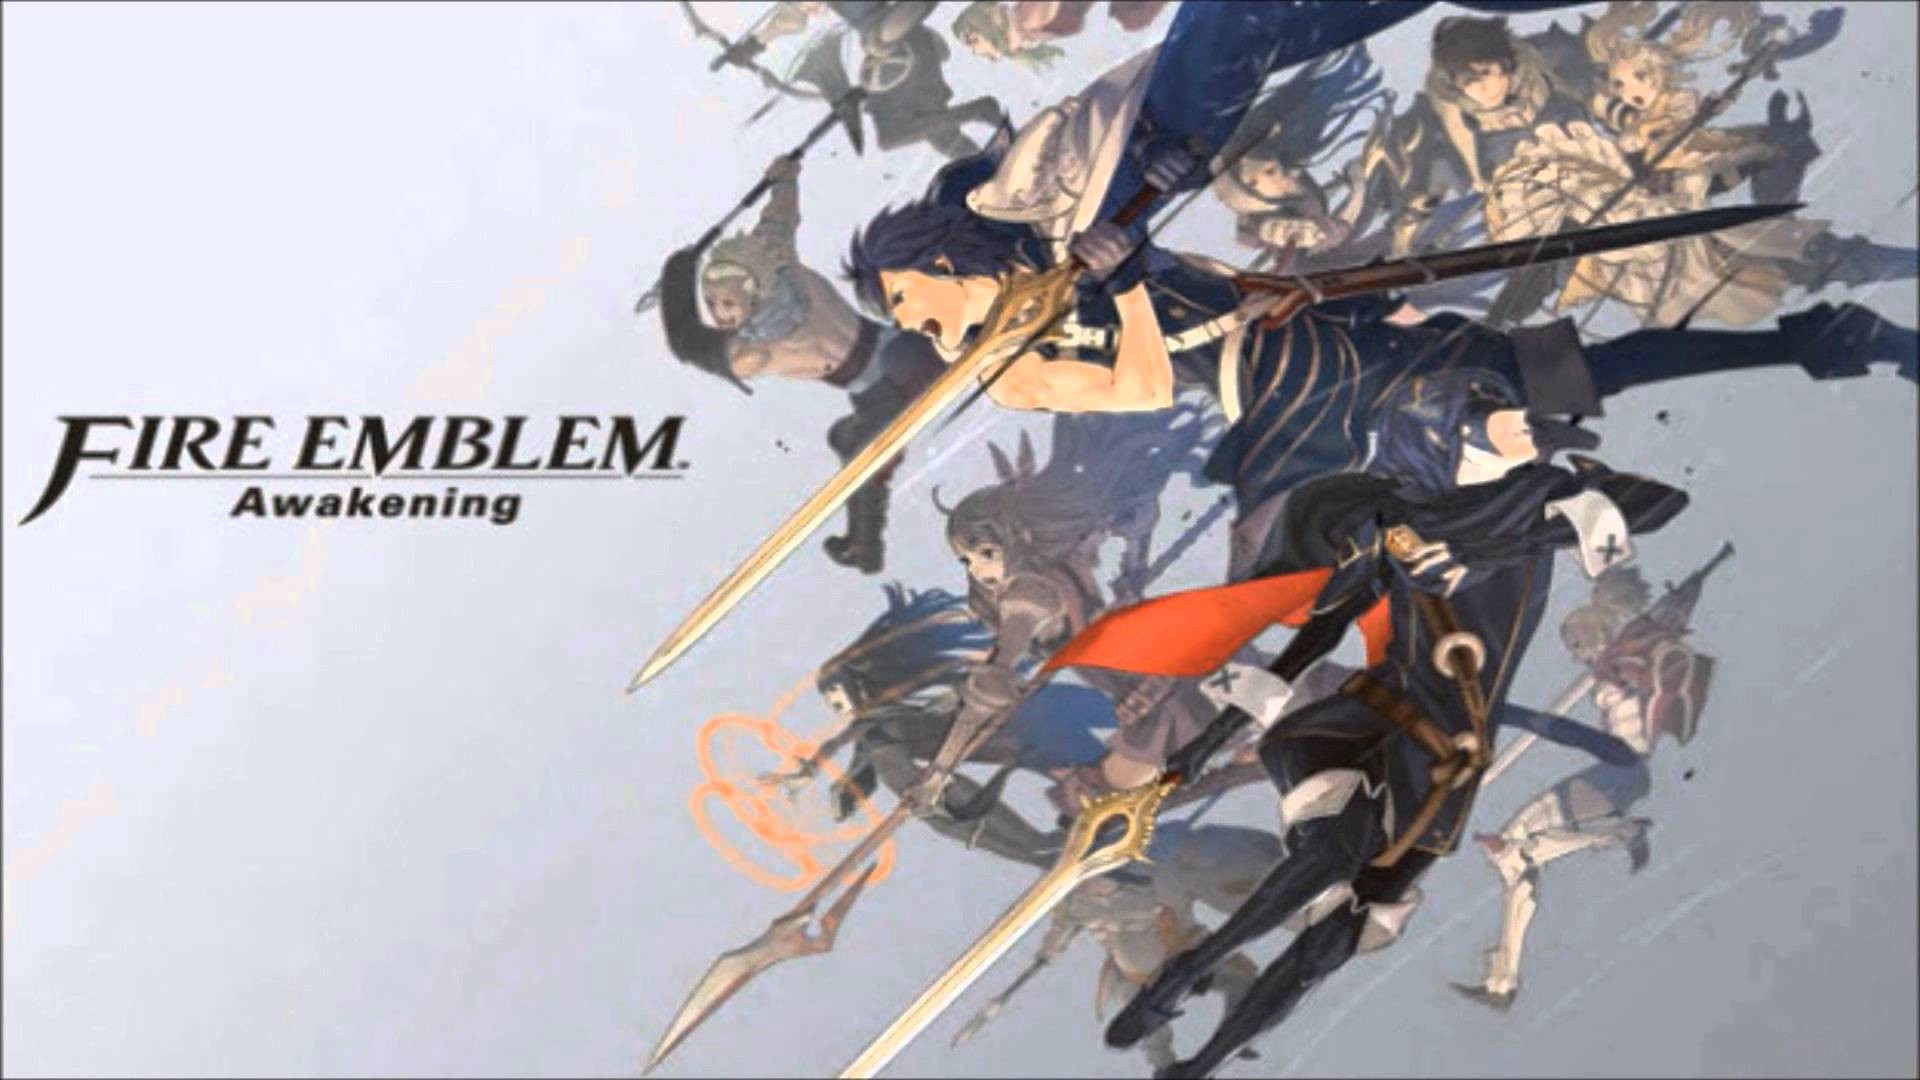 1920x1080 Fire Emblem: Awakening Soundtrack Chaos and Chaos (Ablaze) Combined -  YouTube